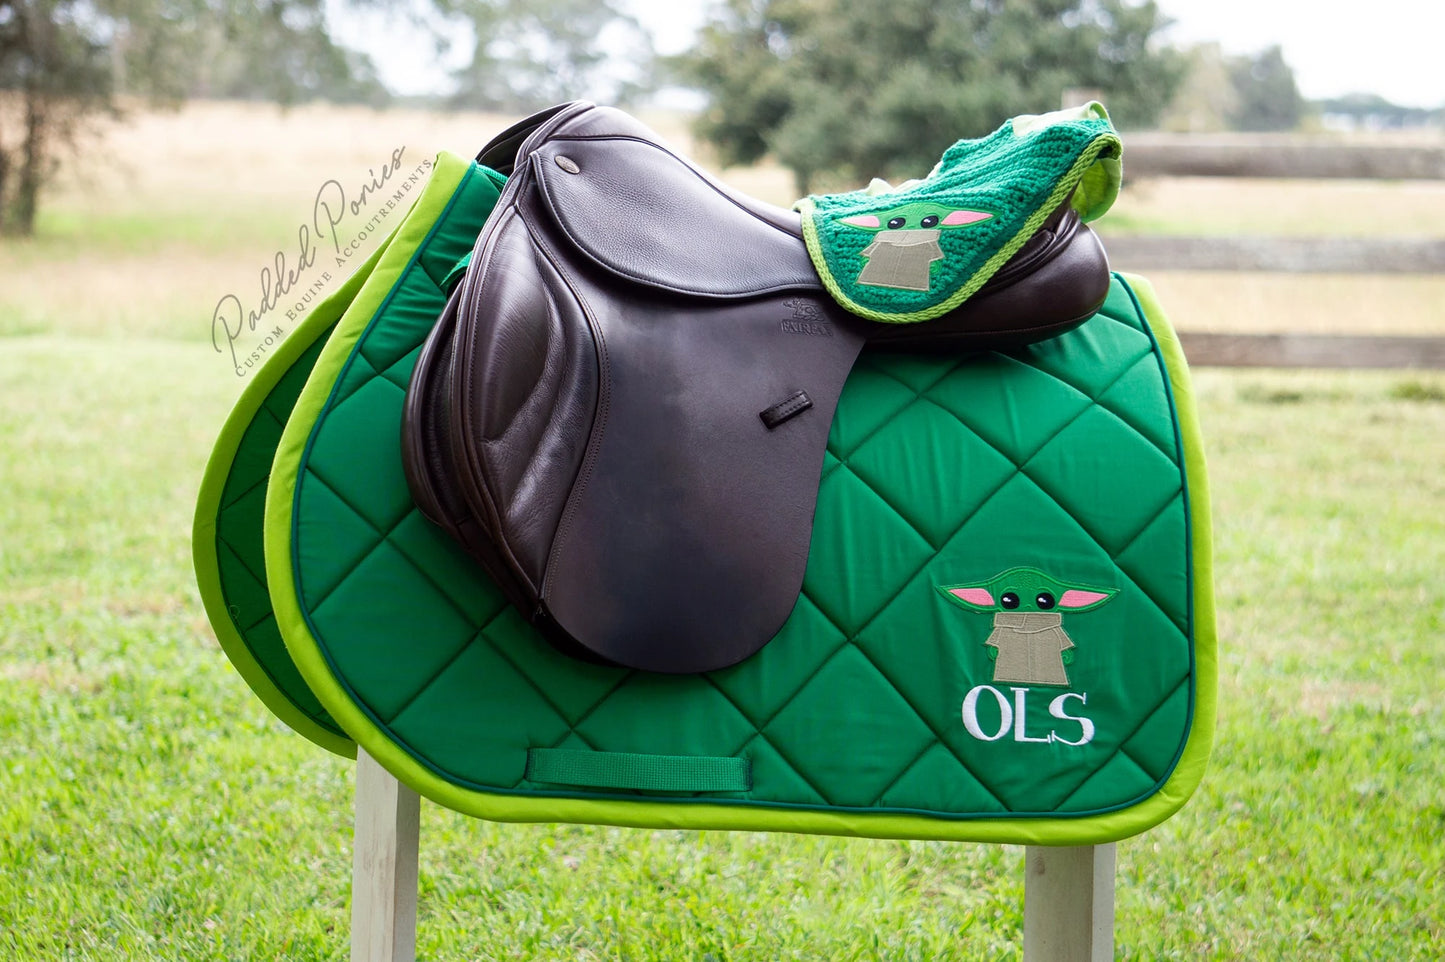 Green Mandalorian Star Wars Baby Yoda Grogu Patch Monogrammed All Purpose Saddle Pad with Matching Fly Veil Bonnet